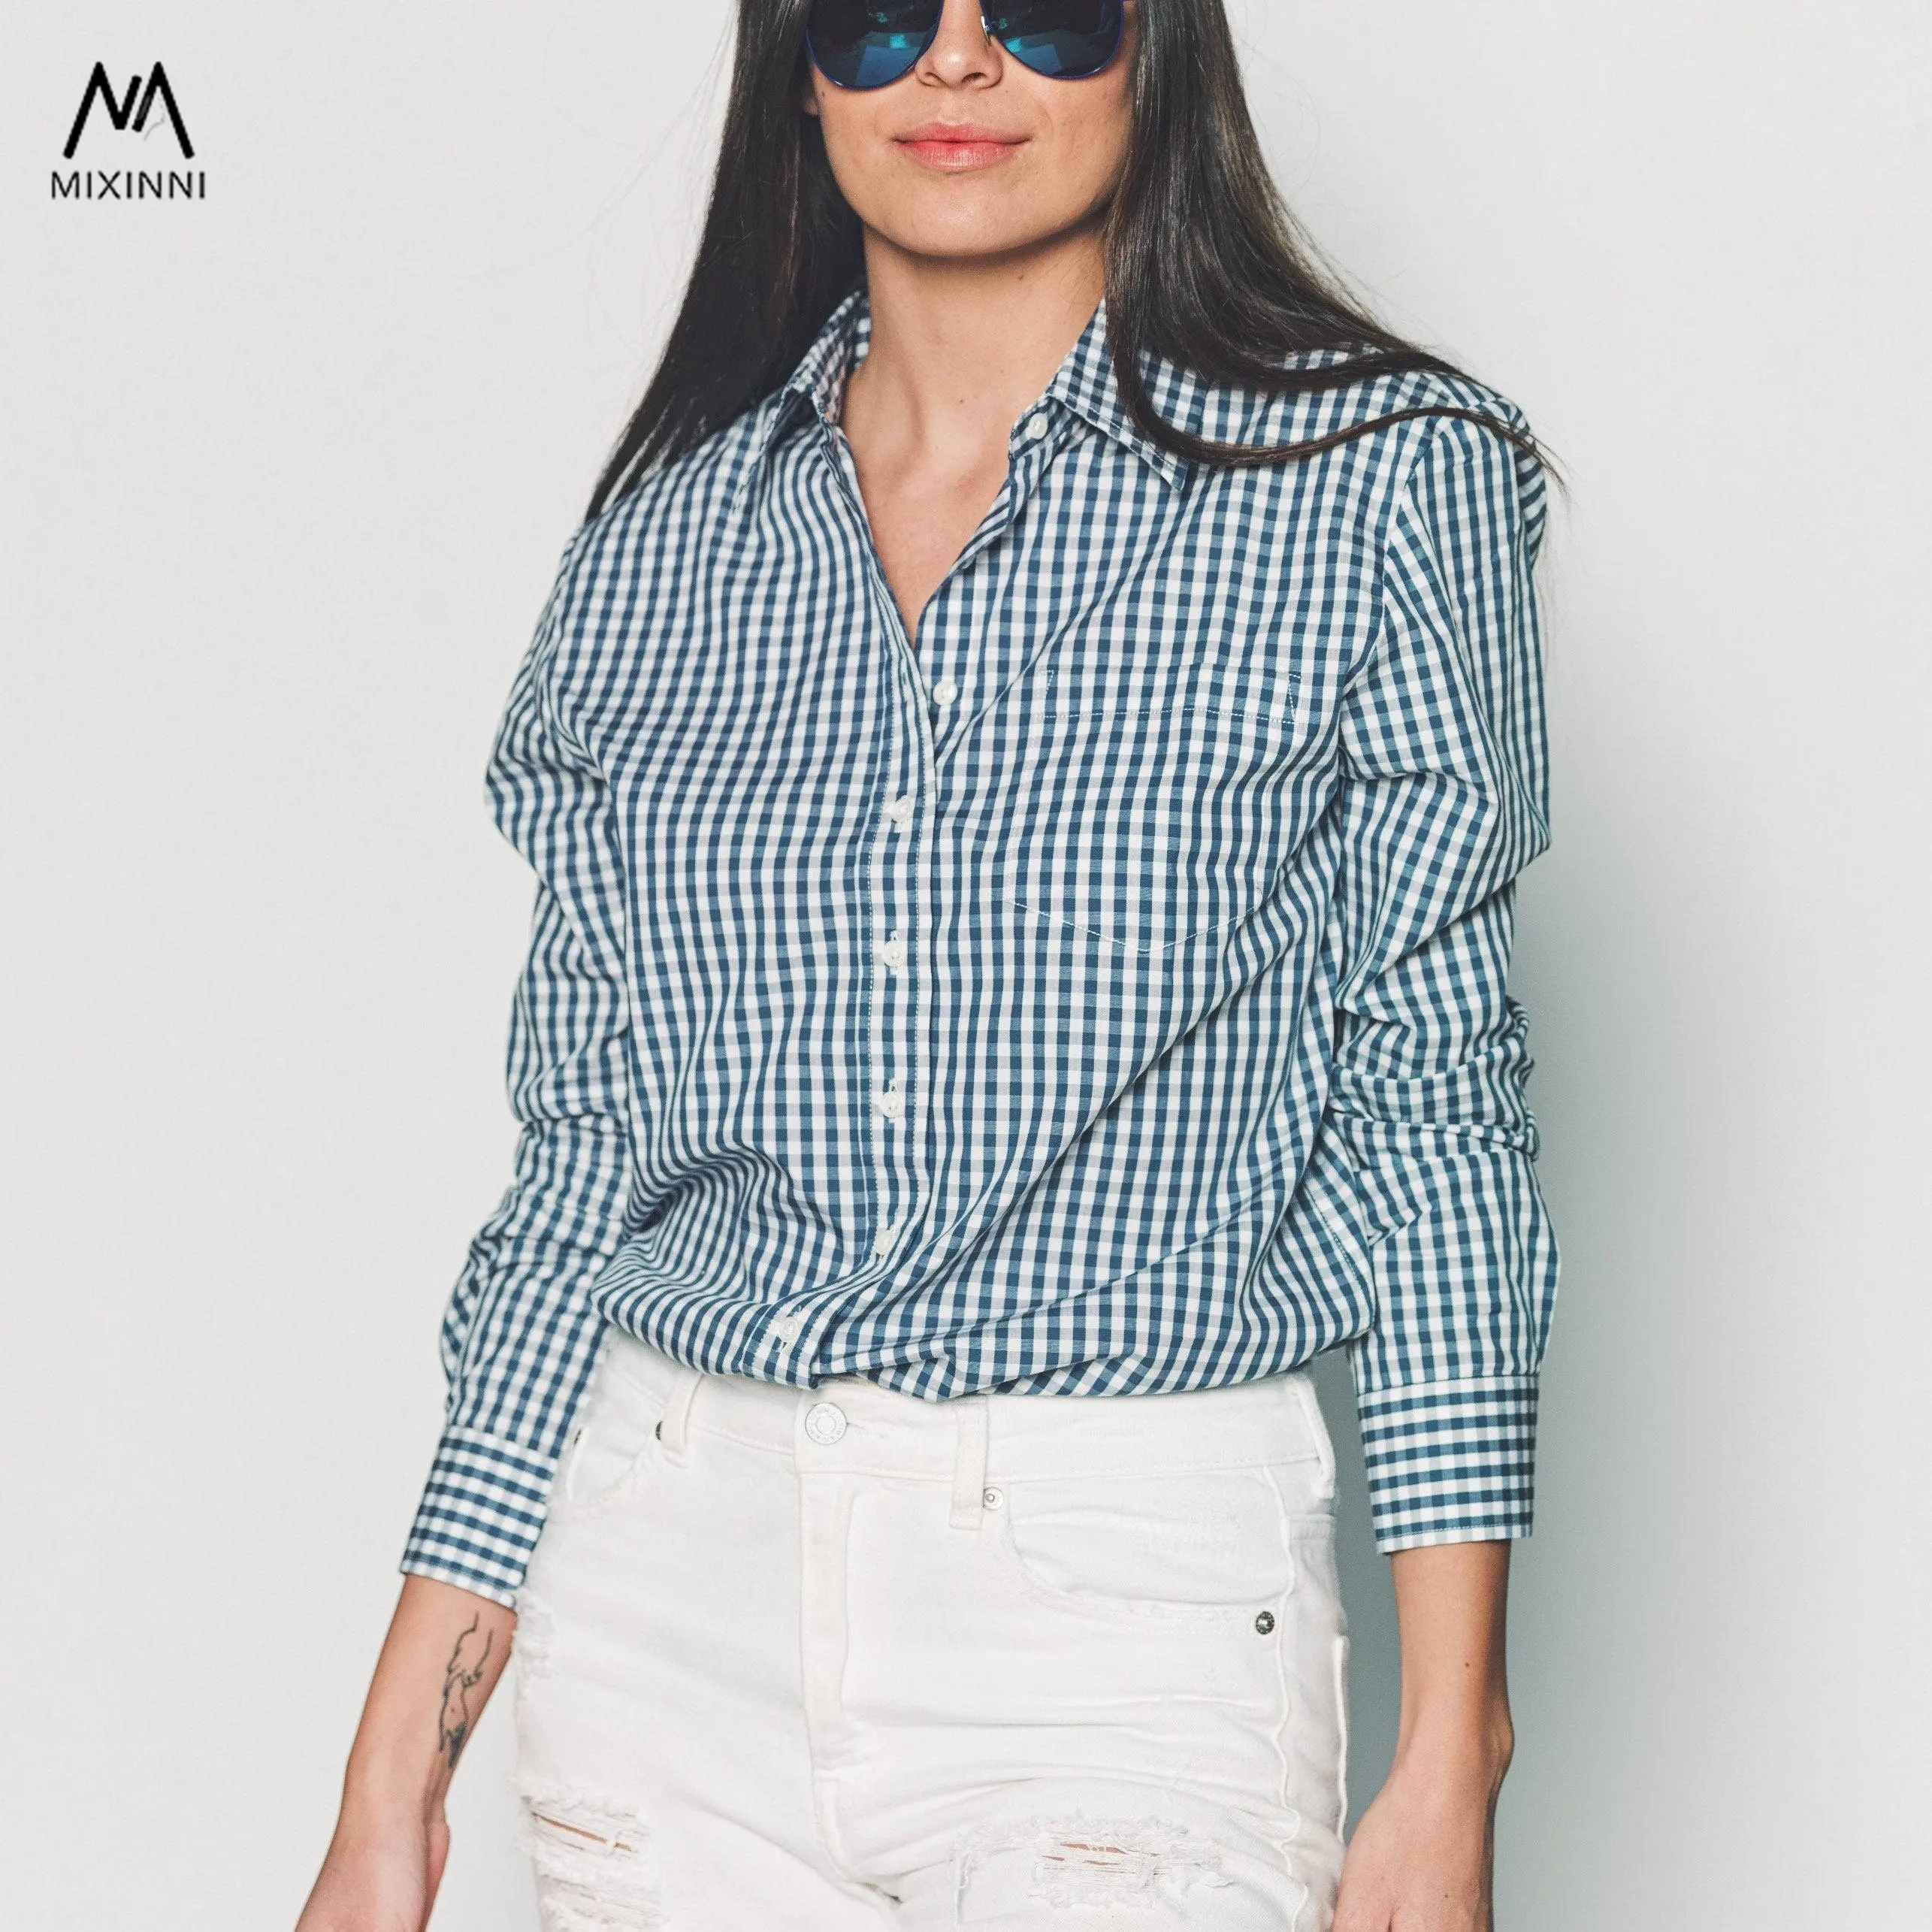 MXN TBS11 High Quality Woman shirt spring Clothes,spring fall clothing for women,clothing sets for women wholesale outfit